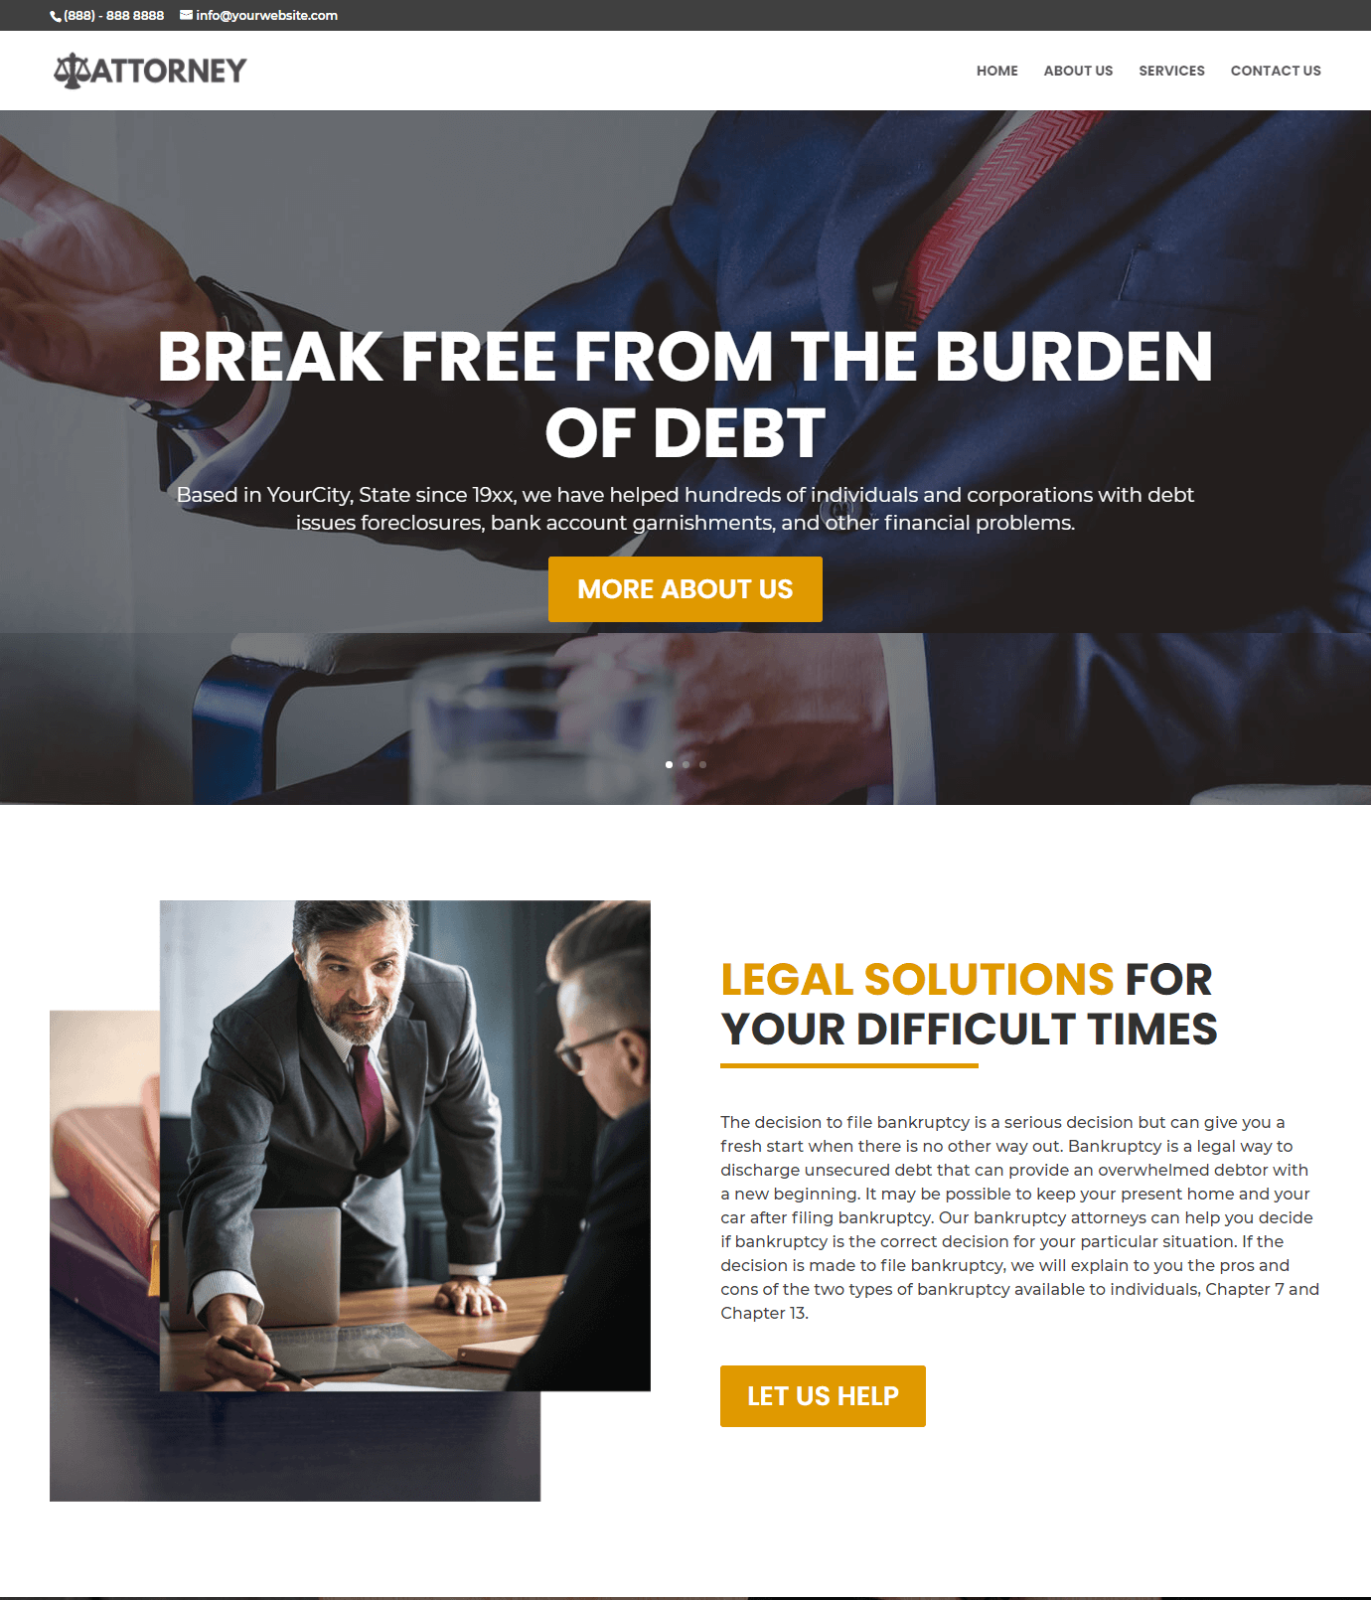 Bankruptcy Solicitor - Professionally Designed Local Business Website + Domain